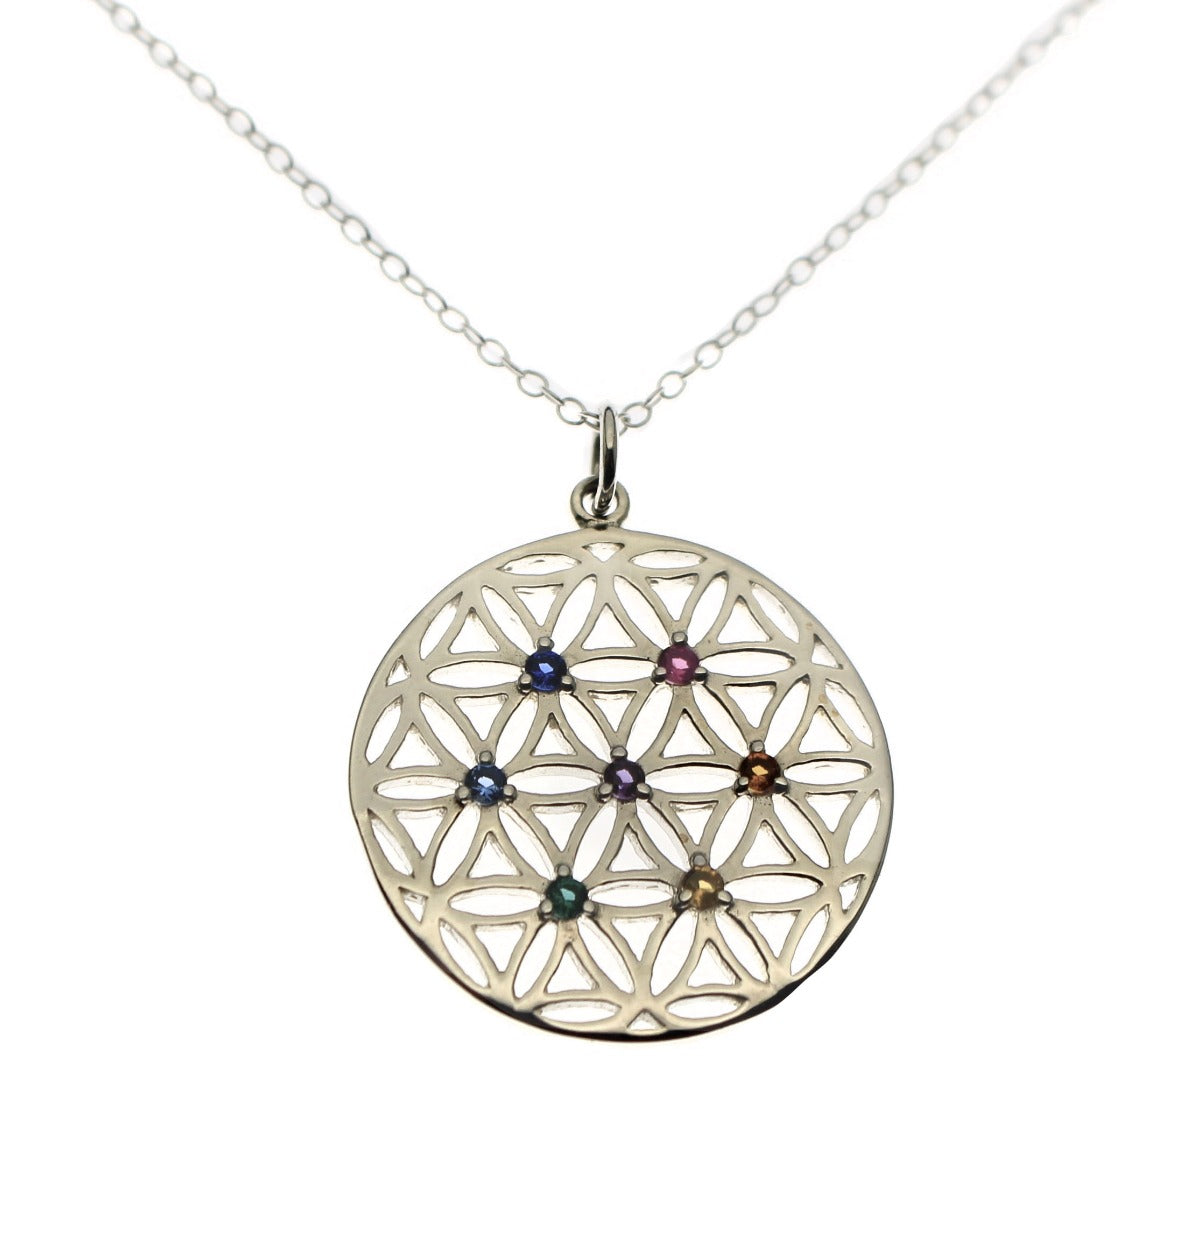 Chakra Crystals Flower of Life Necklace - Love It Personalized